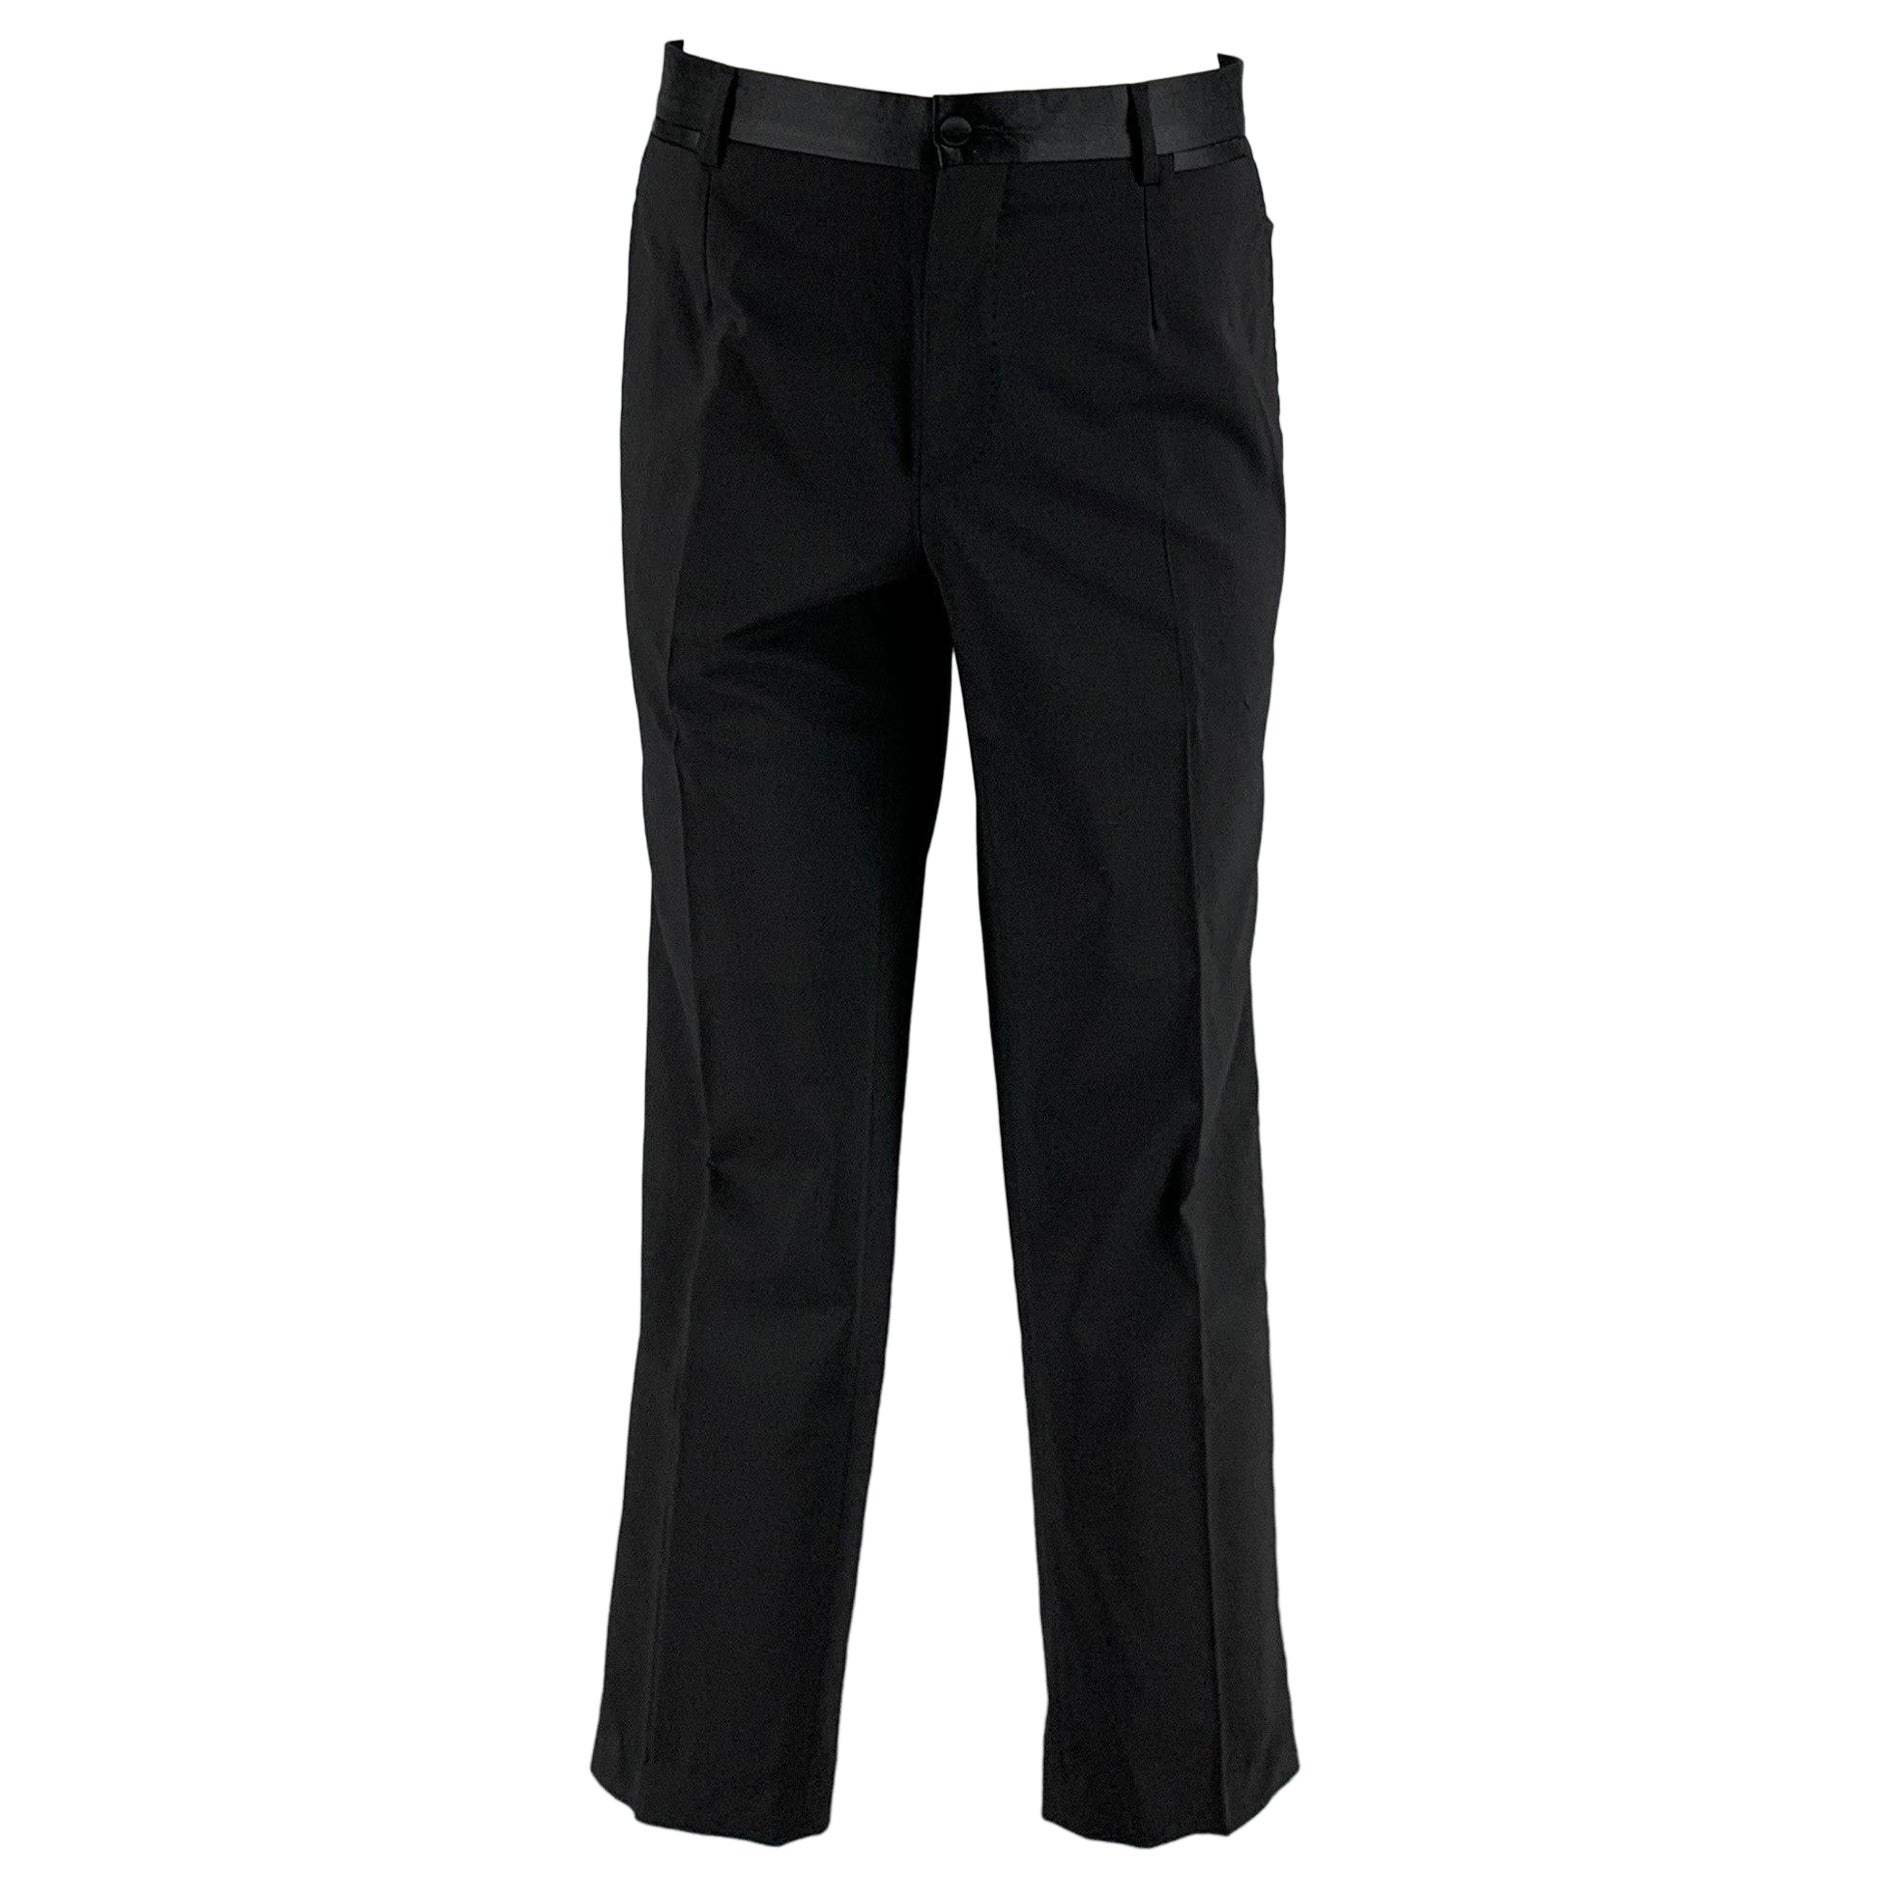 D&G by DOLCE & GABBANA Size 32 Black Solid Wool Blend Tuxedo Dress Pants For Sale